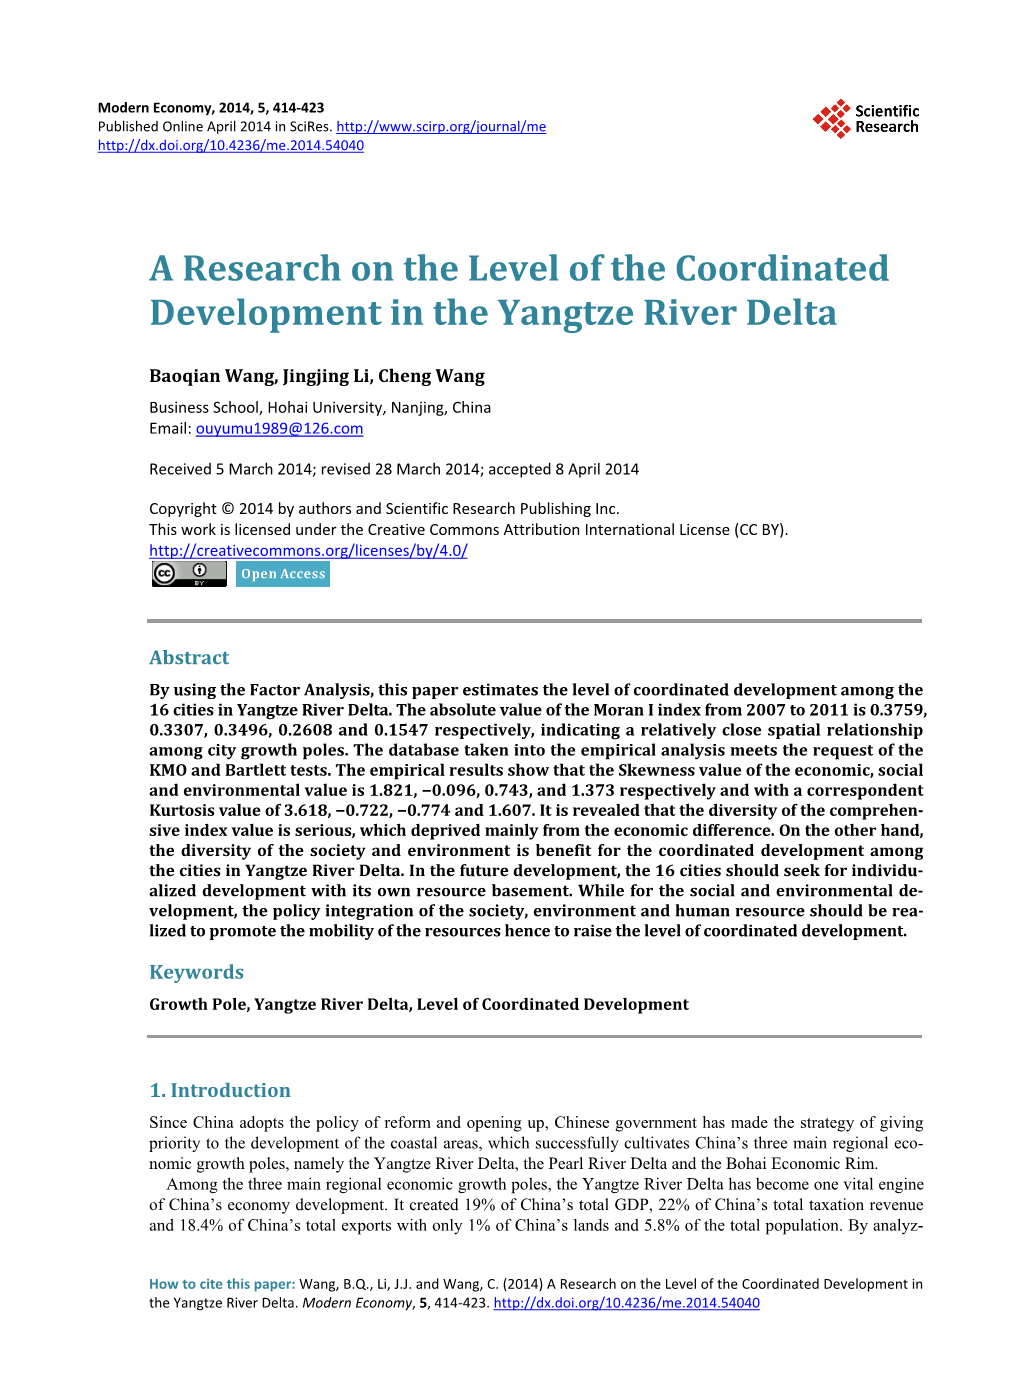 A Research on the Level of the Coordinated Development in the Yangtze River Delta